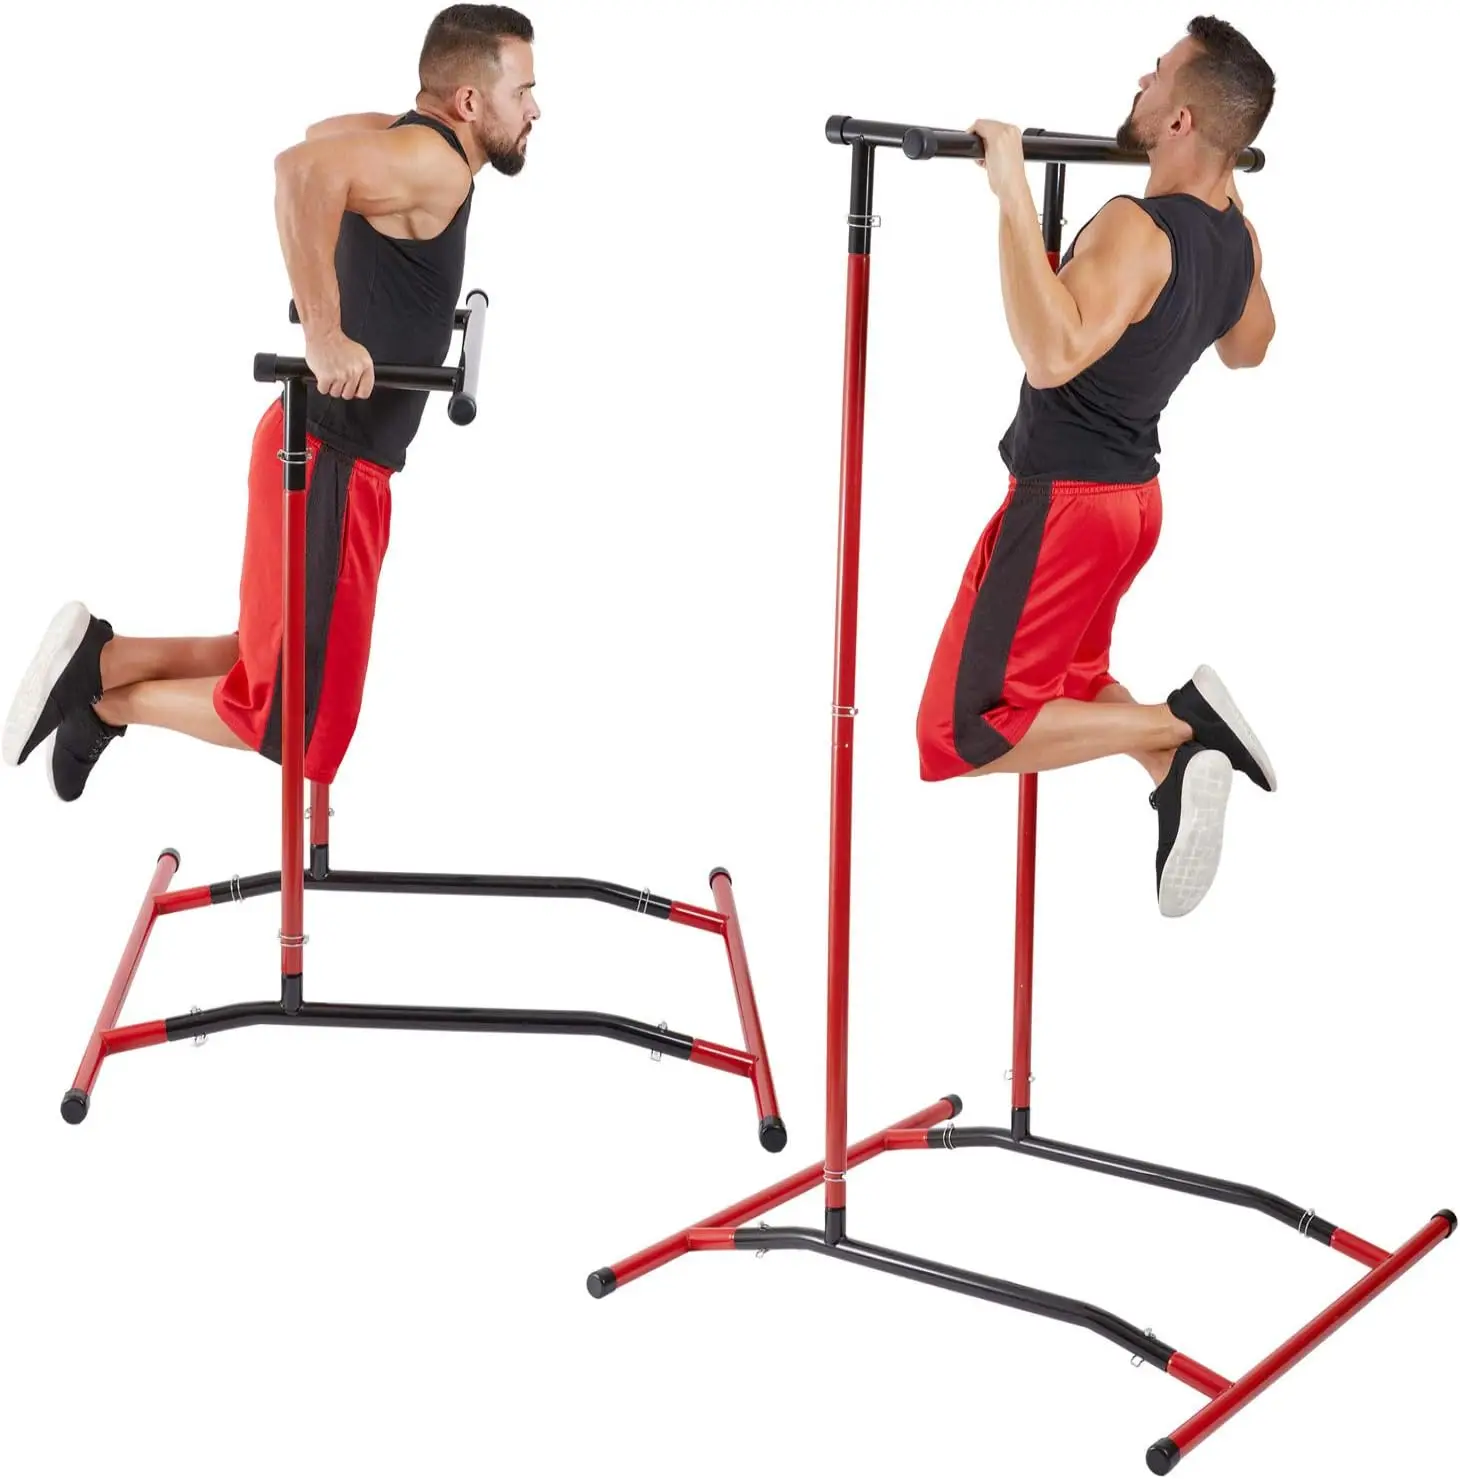 

Pull Up Bar Free Standing Dip Station, Portable Power Home Gym Equipment, Storage Bag And Downloadable Exercise Manual